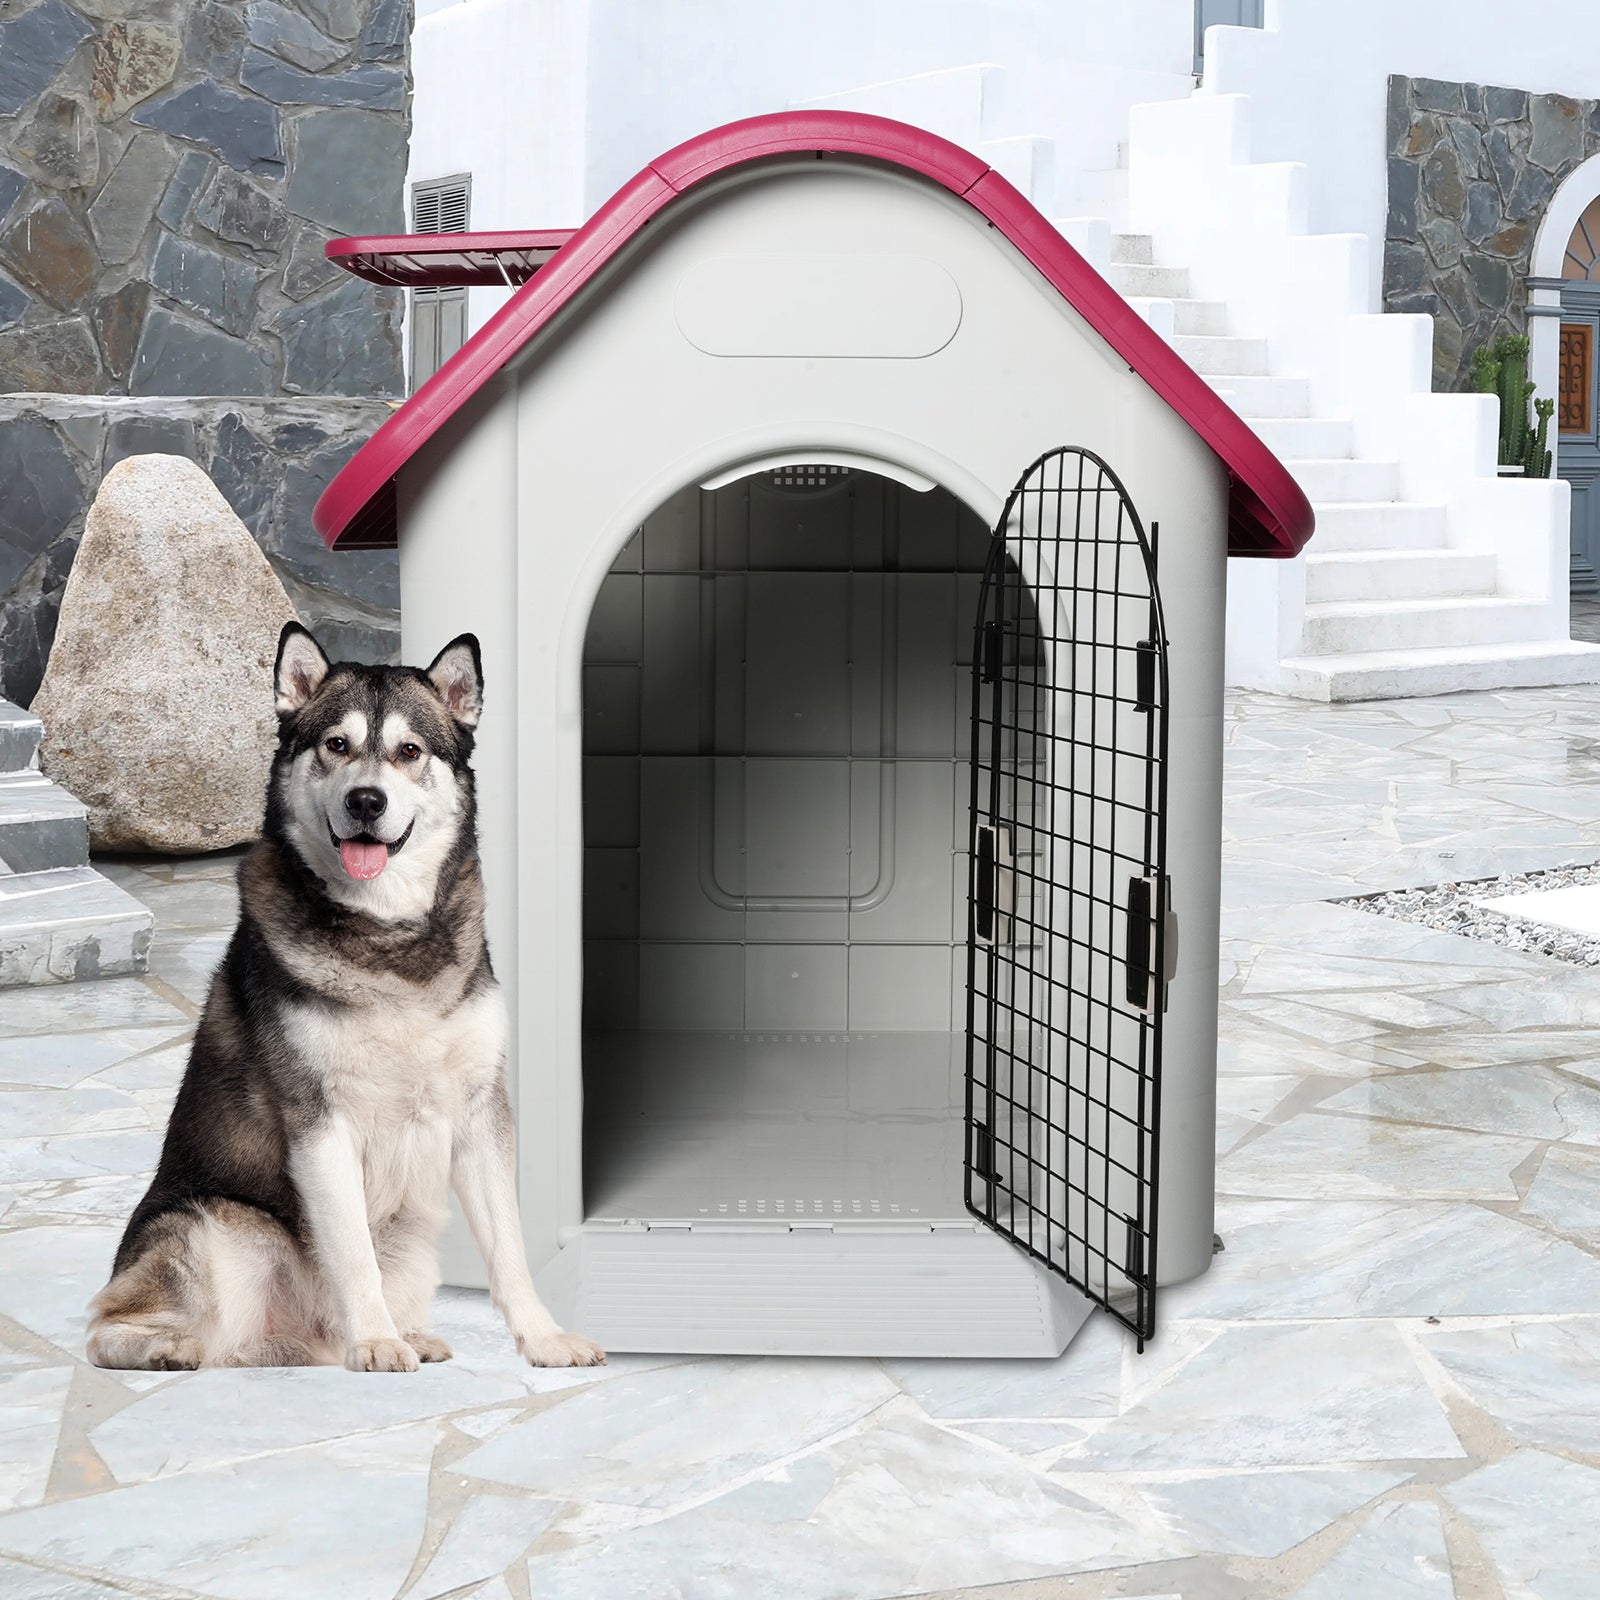 Outdoor Dog House Plastic Waterproof Kennel with Air Vents, 42"L x 33"W x 38"H, Red Roof